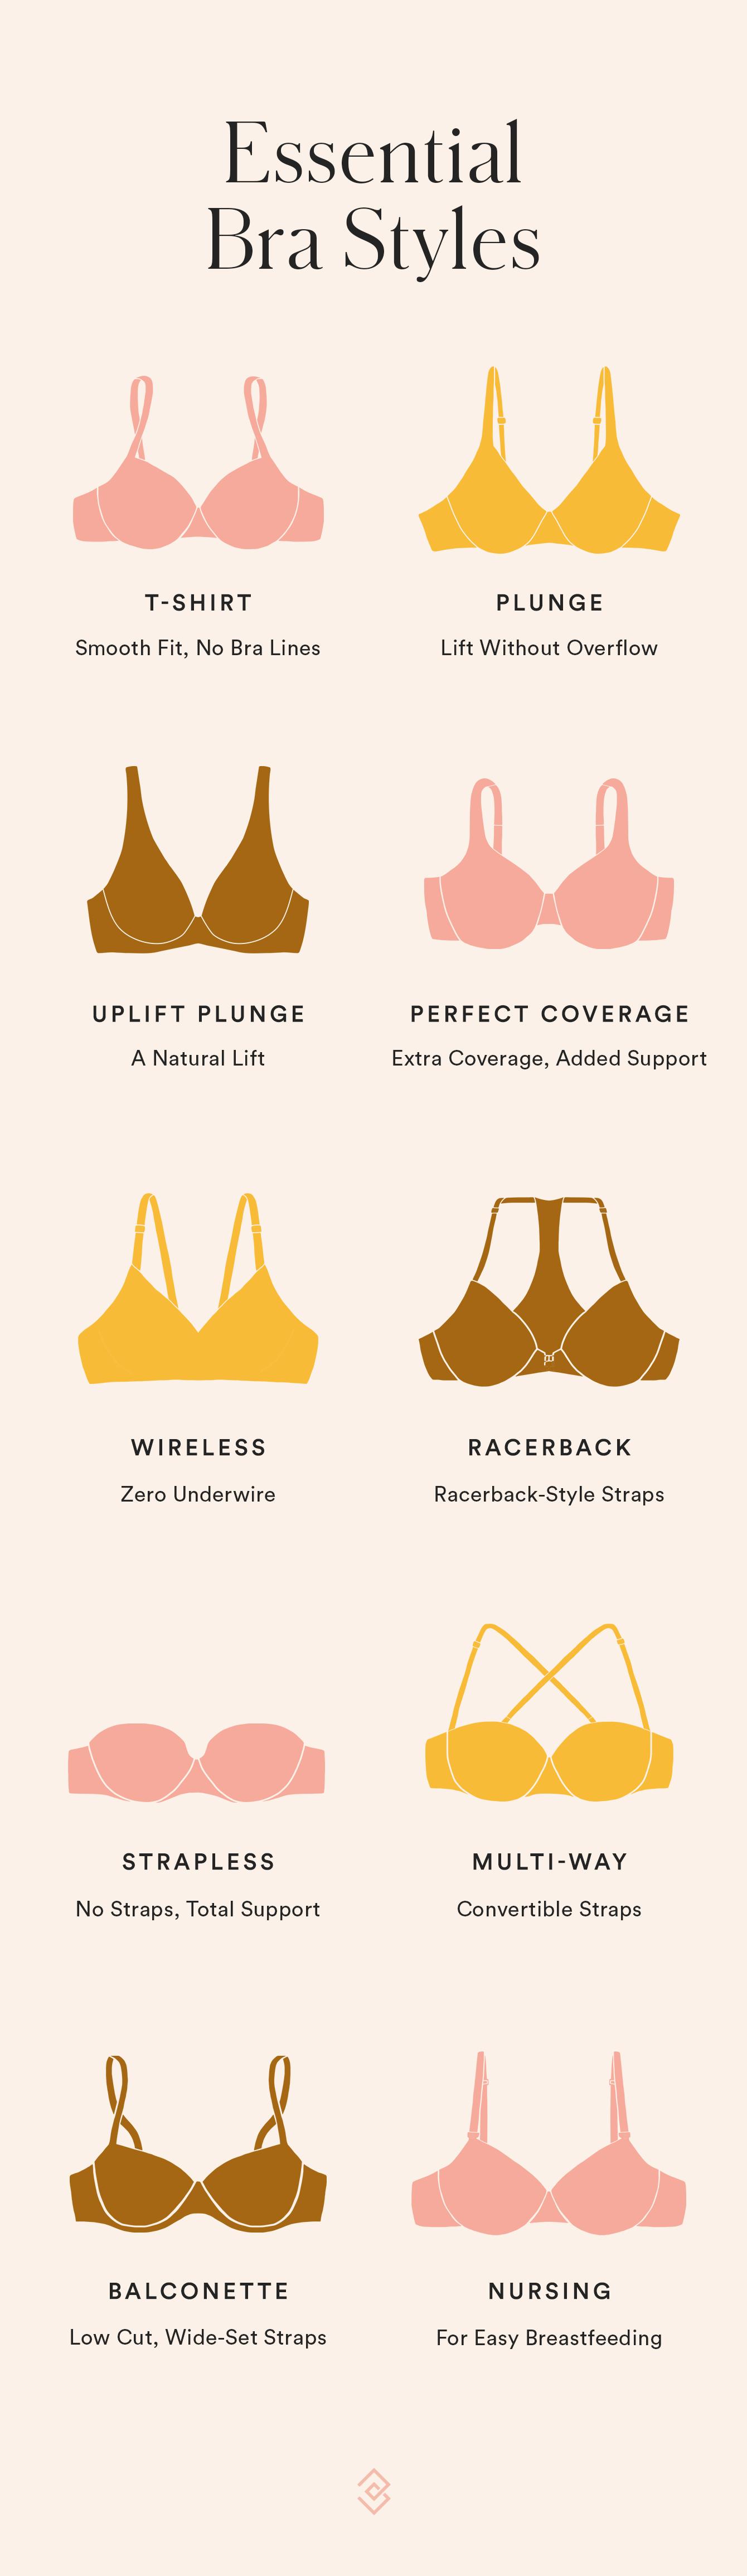 How to Choose a Bra and Other Bra Advice Tips